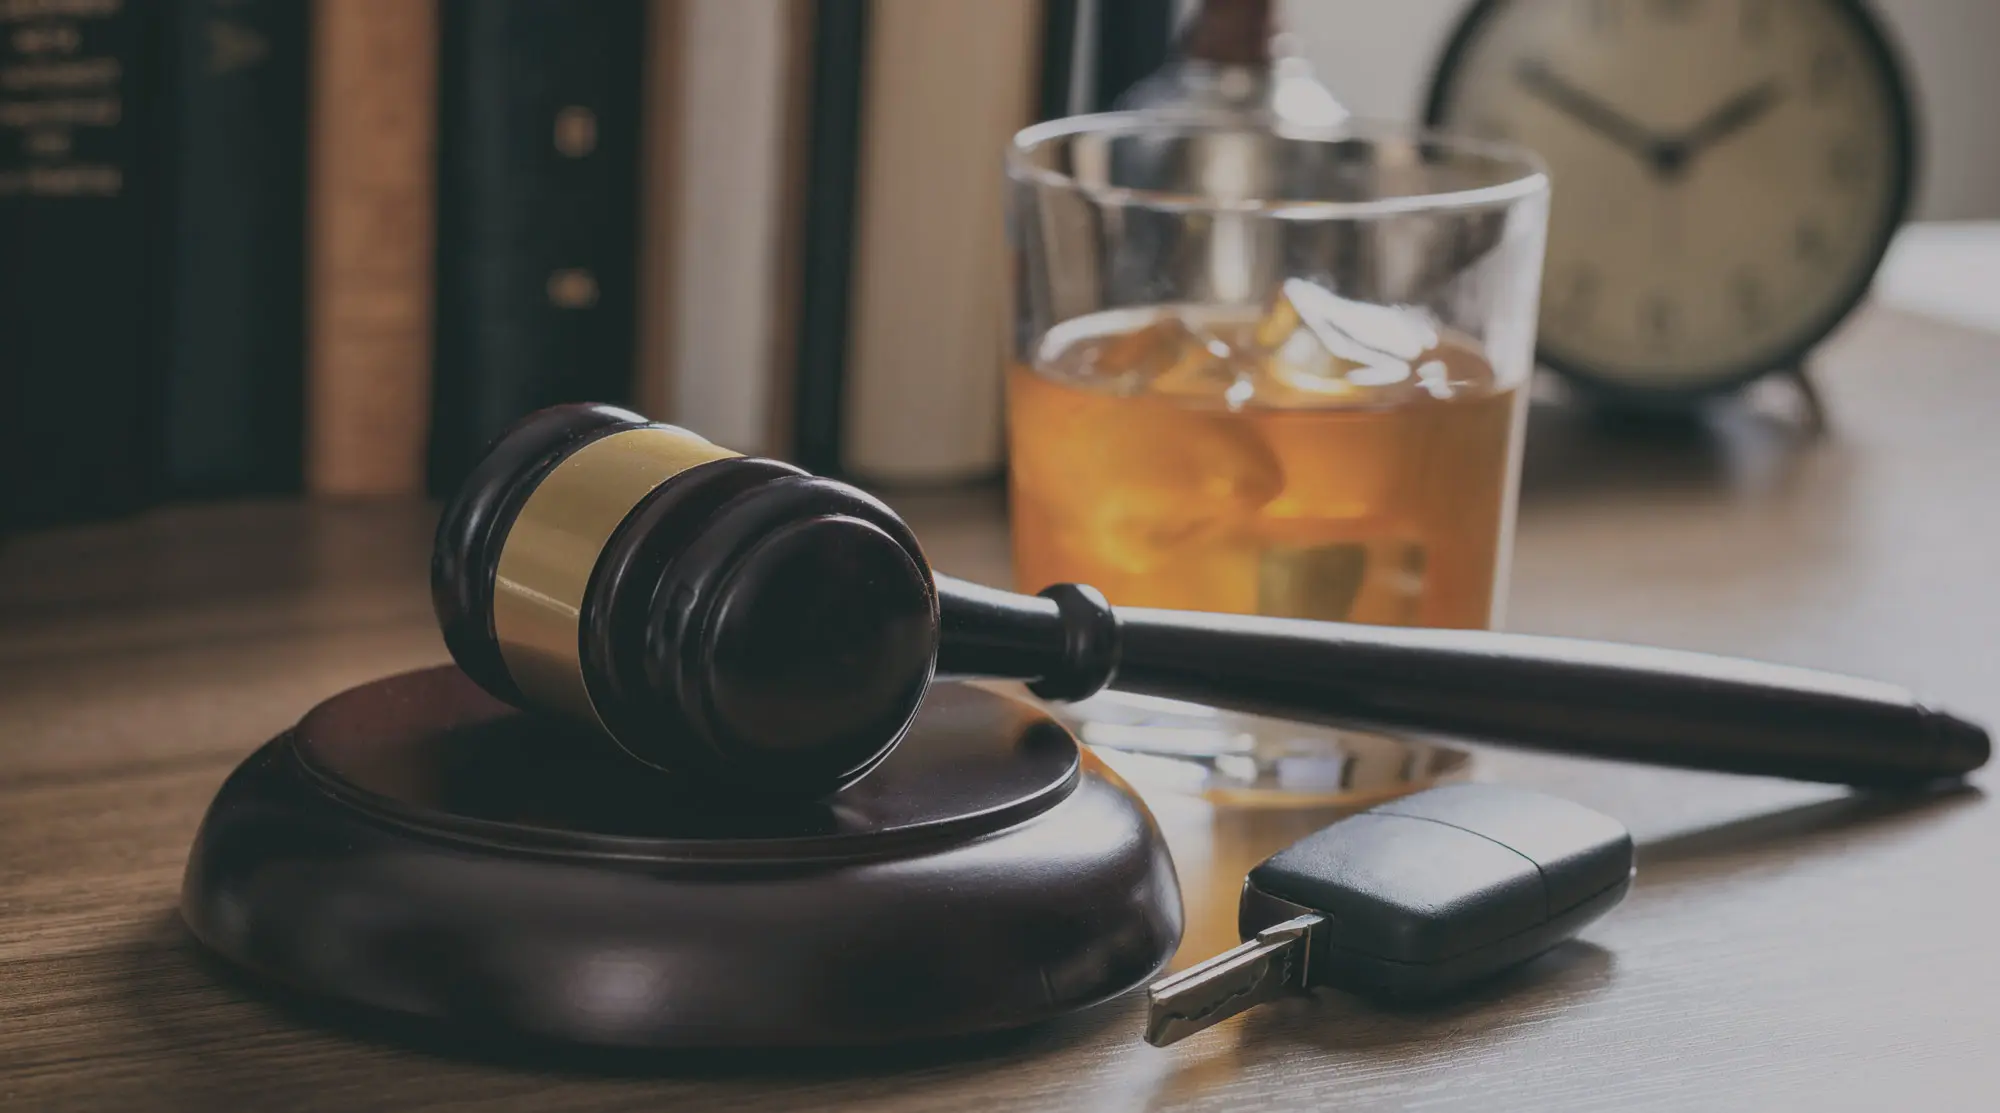 Learn More about What to do if you get pulled over for DUI in California